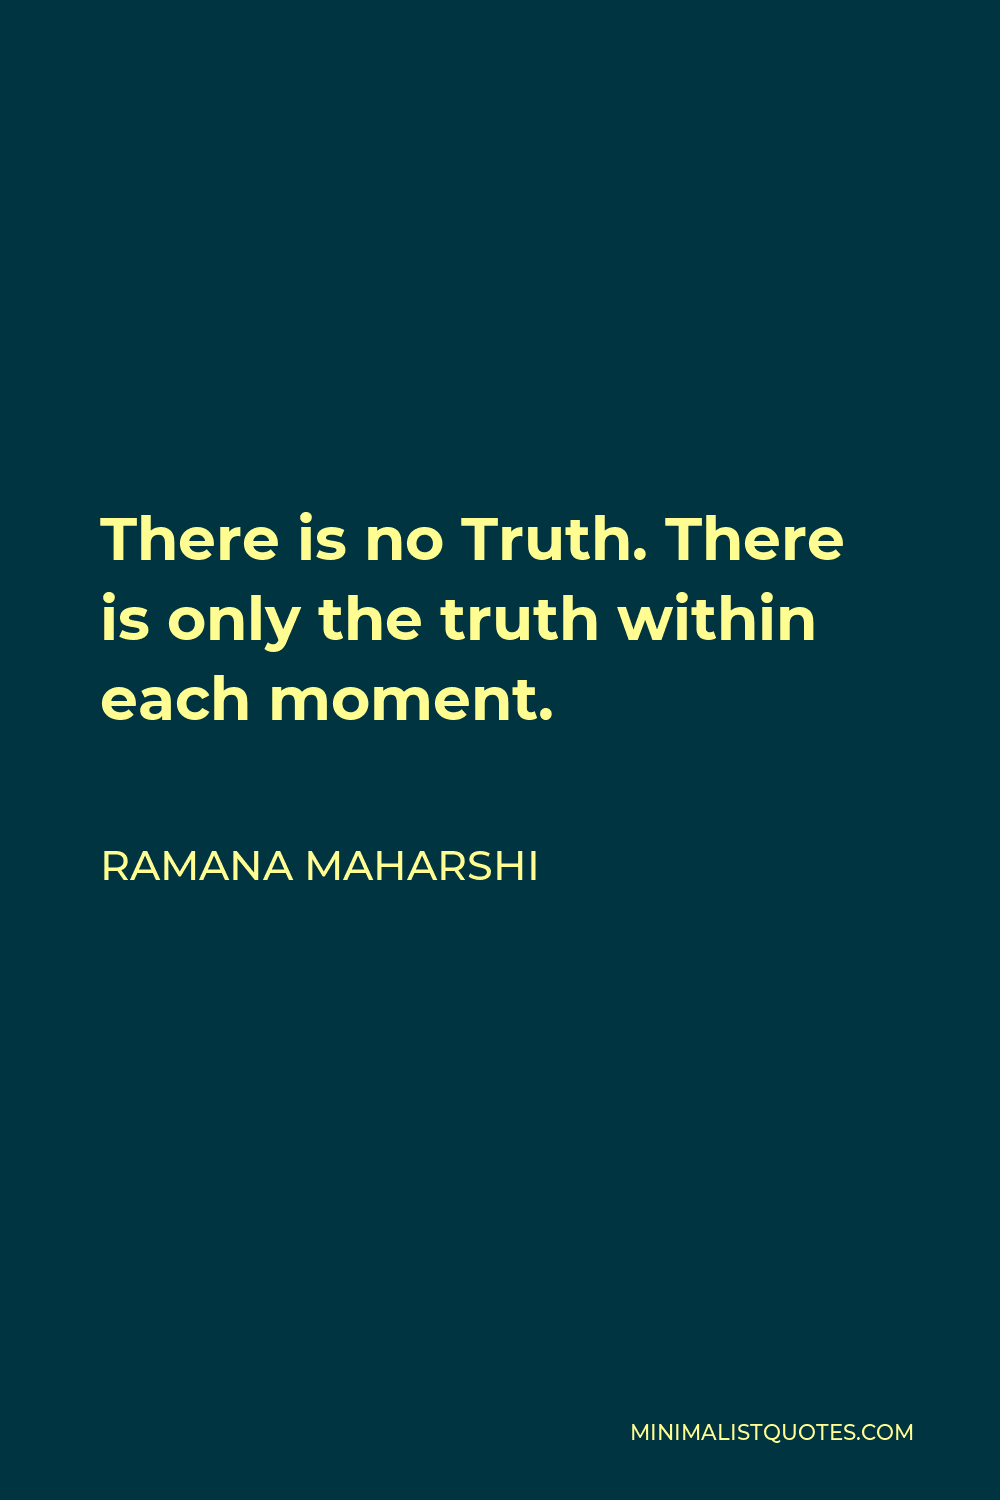 Ramana Maharshi Quote - There is no Truth. There is only the truth within each moment.